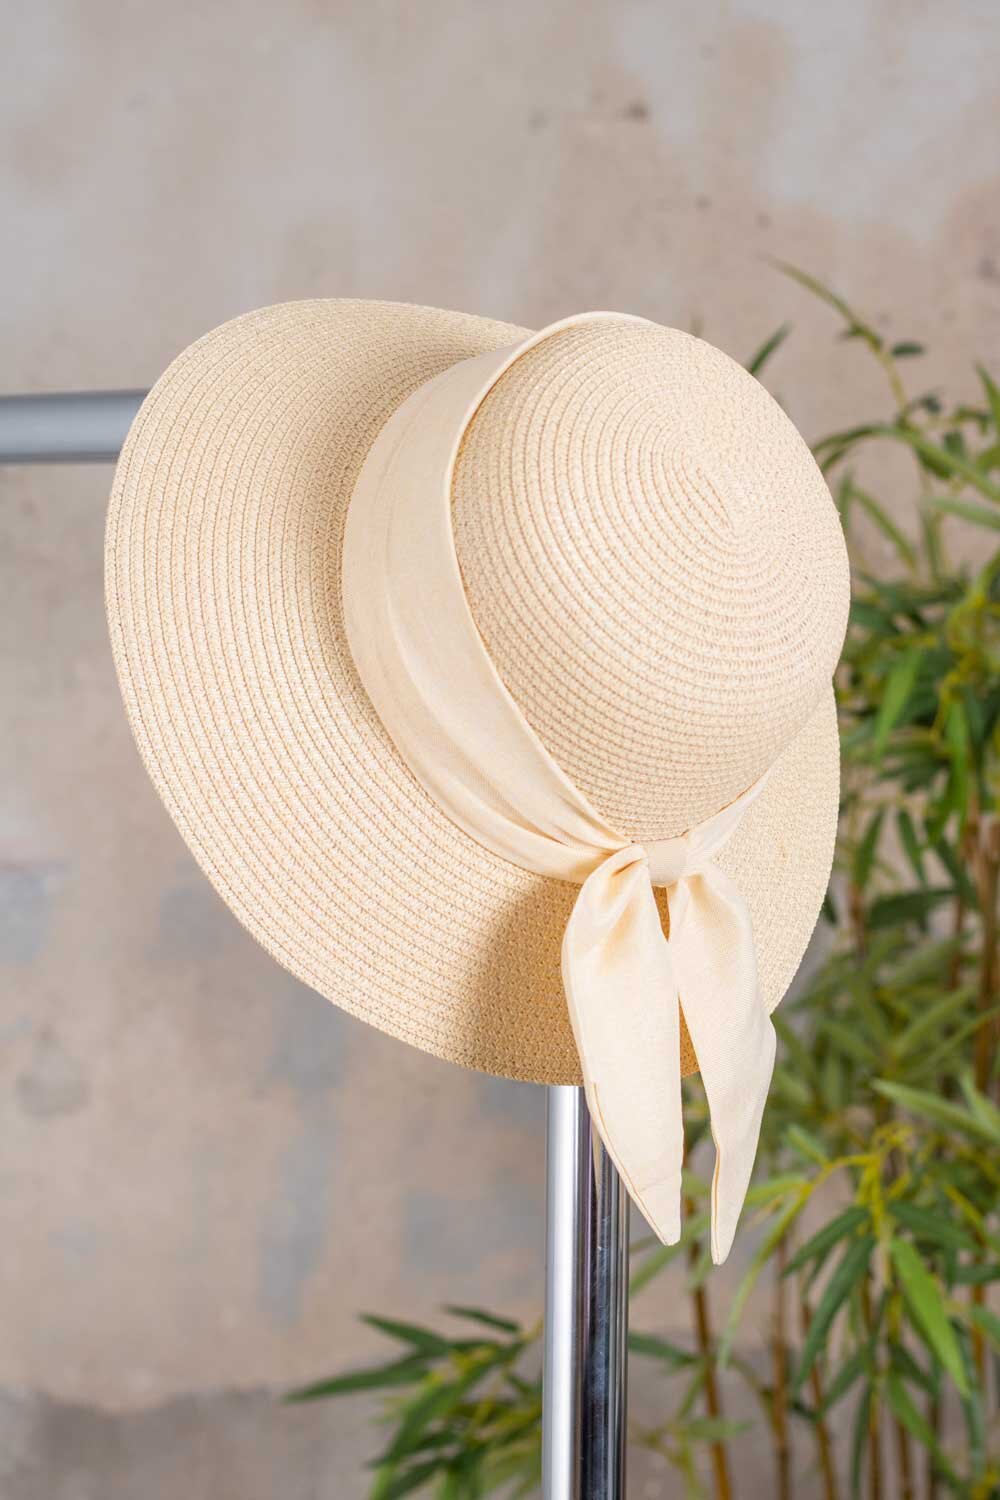 Sun hat with Bow